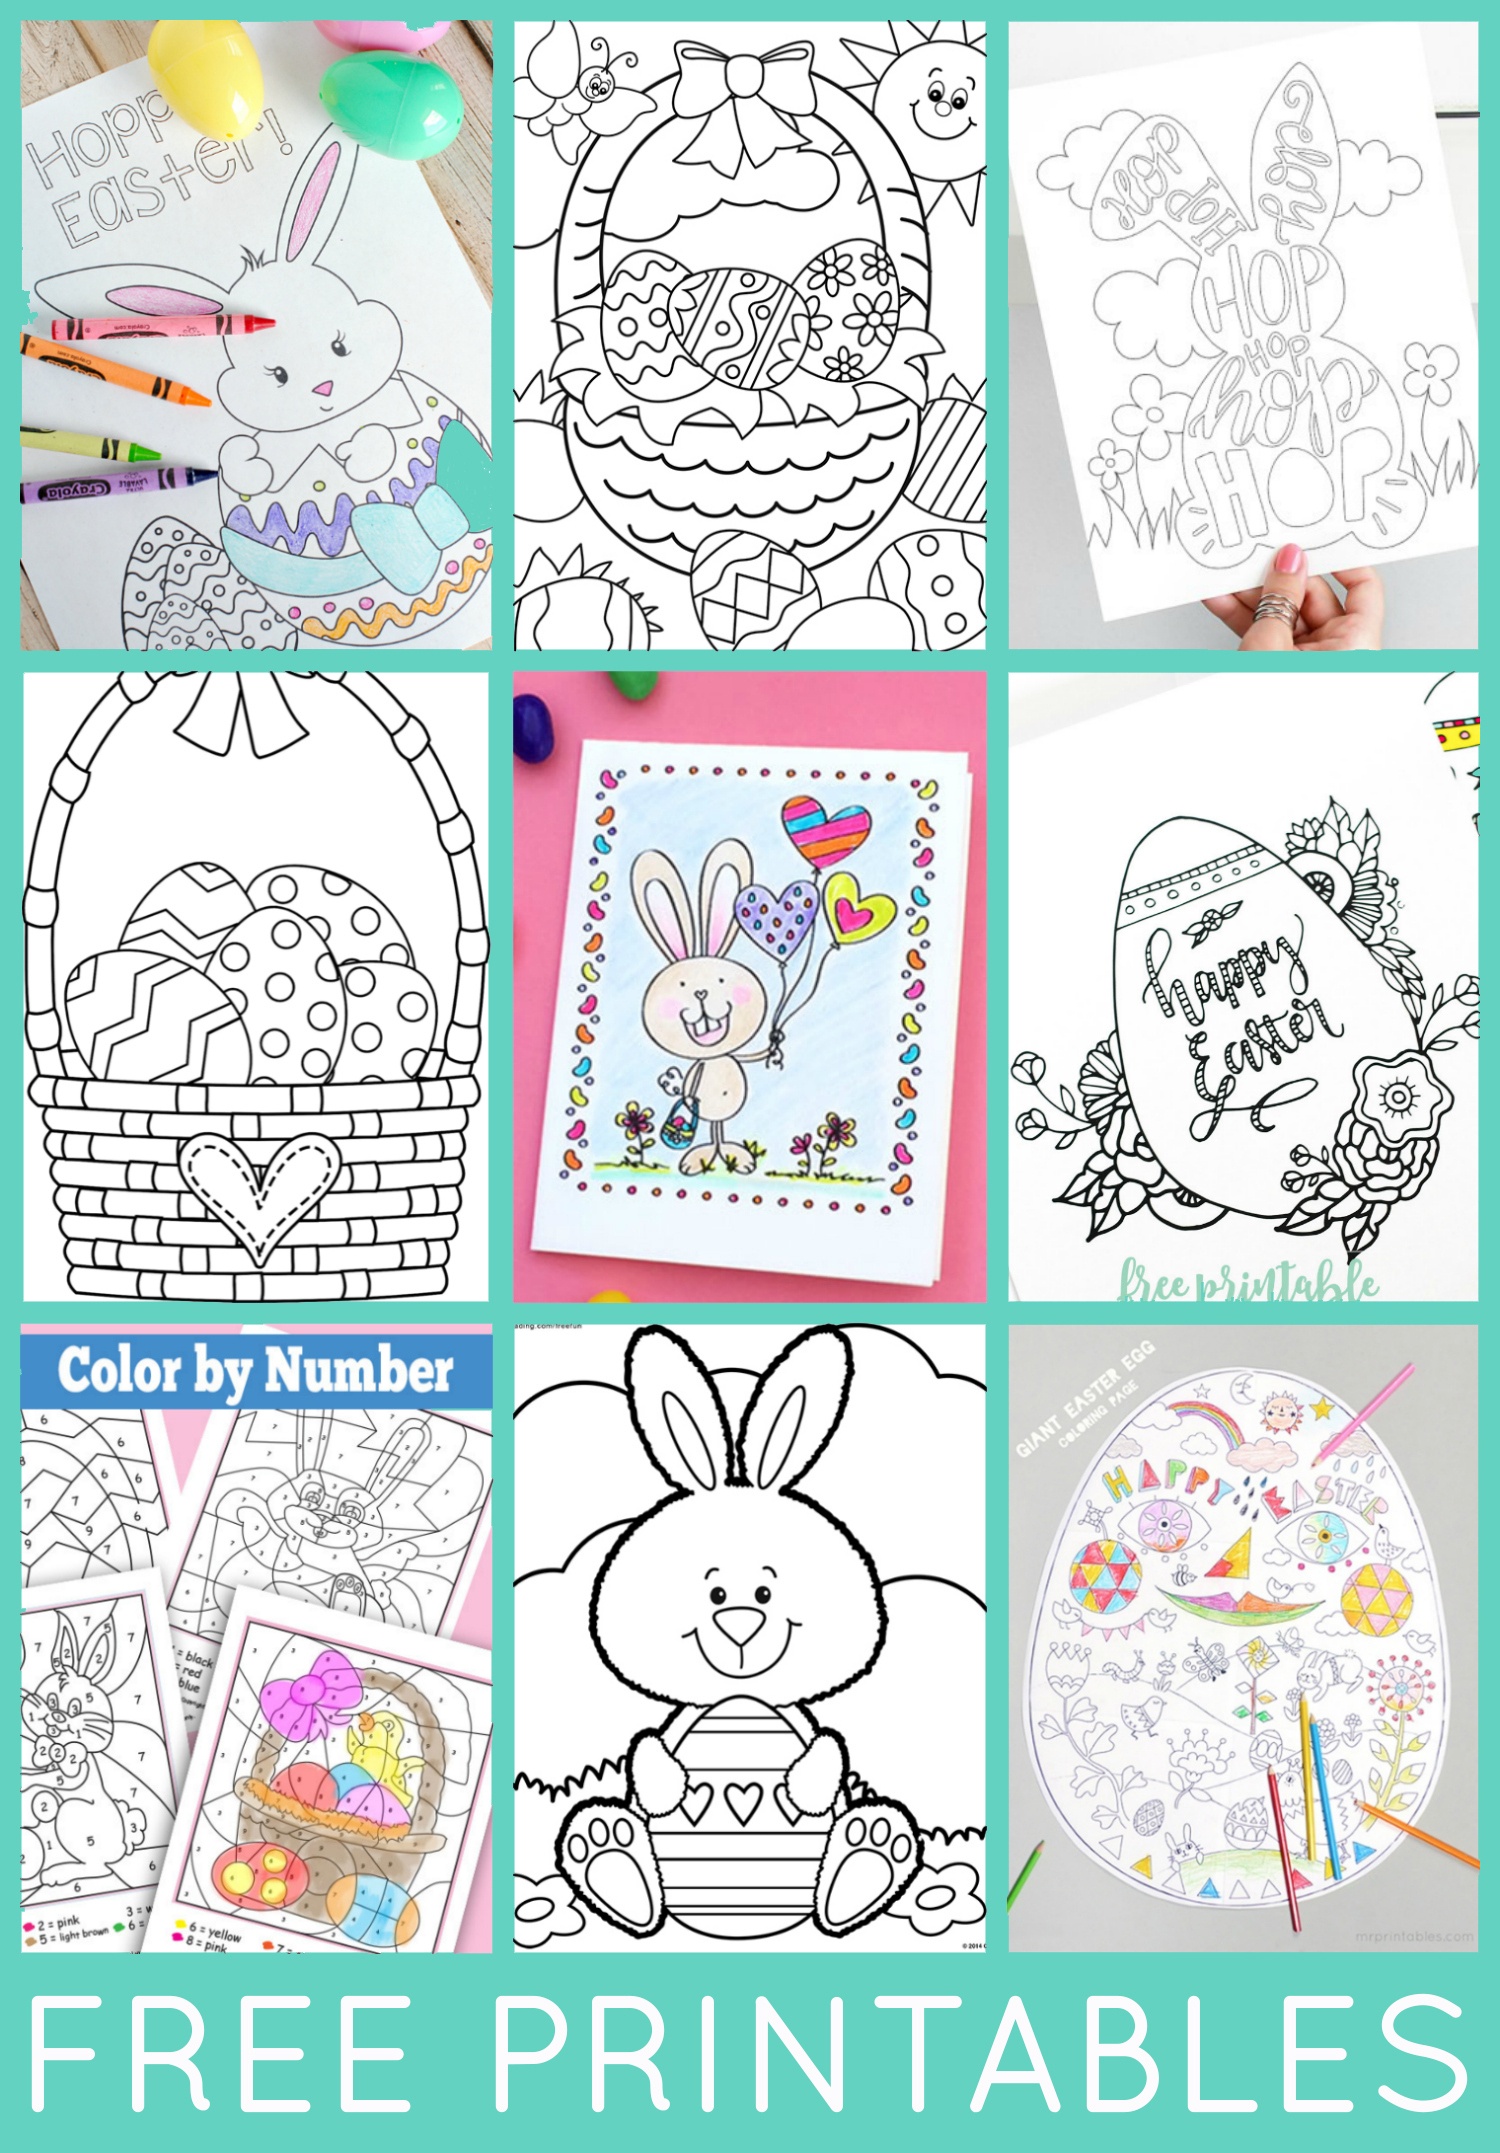 Free Easter Coloring Pages - Happiness Is Homemade - Free Printable Coloring Pages Easter Basket